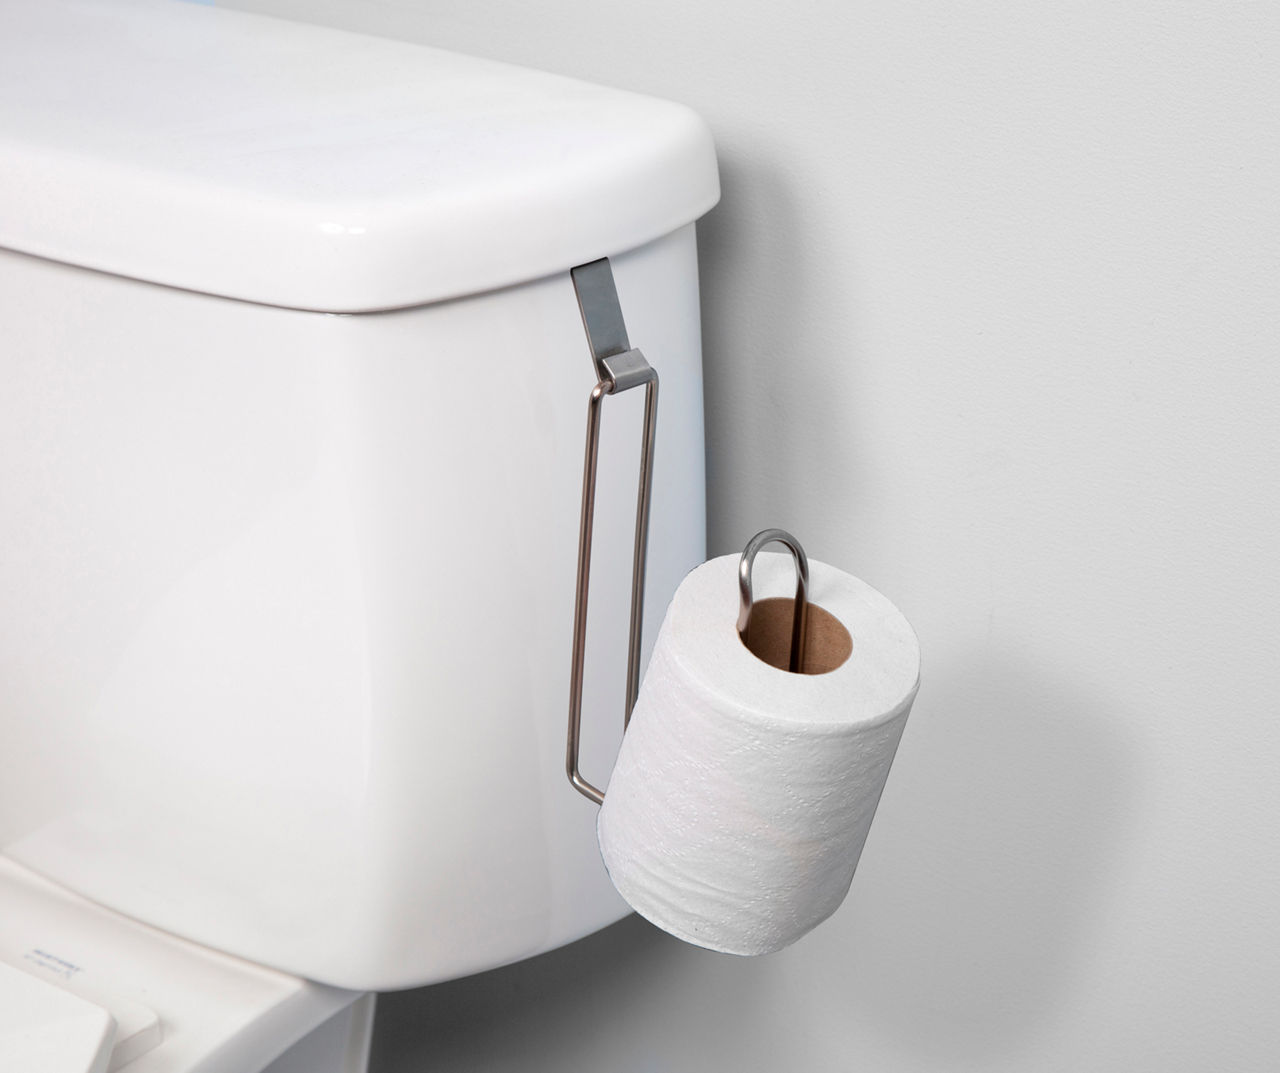 Toilet Paper Holder r, Over The Tank Two Slot Tissue Organizer - silver -  On Sale - Bed Bath & Beyond - 34288554